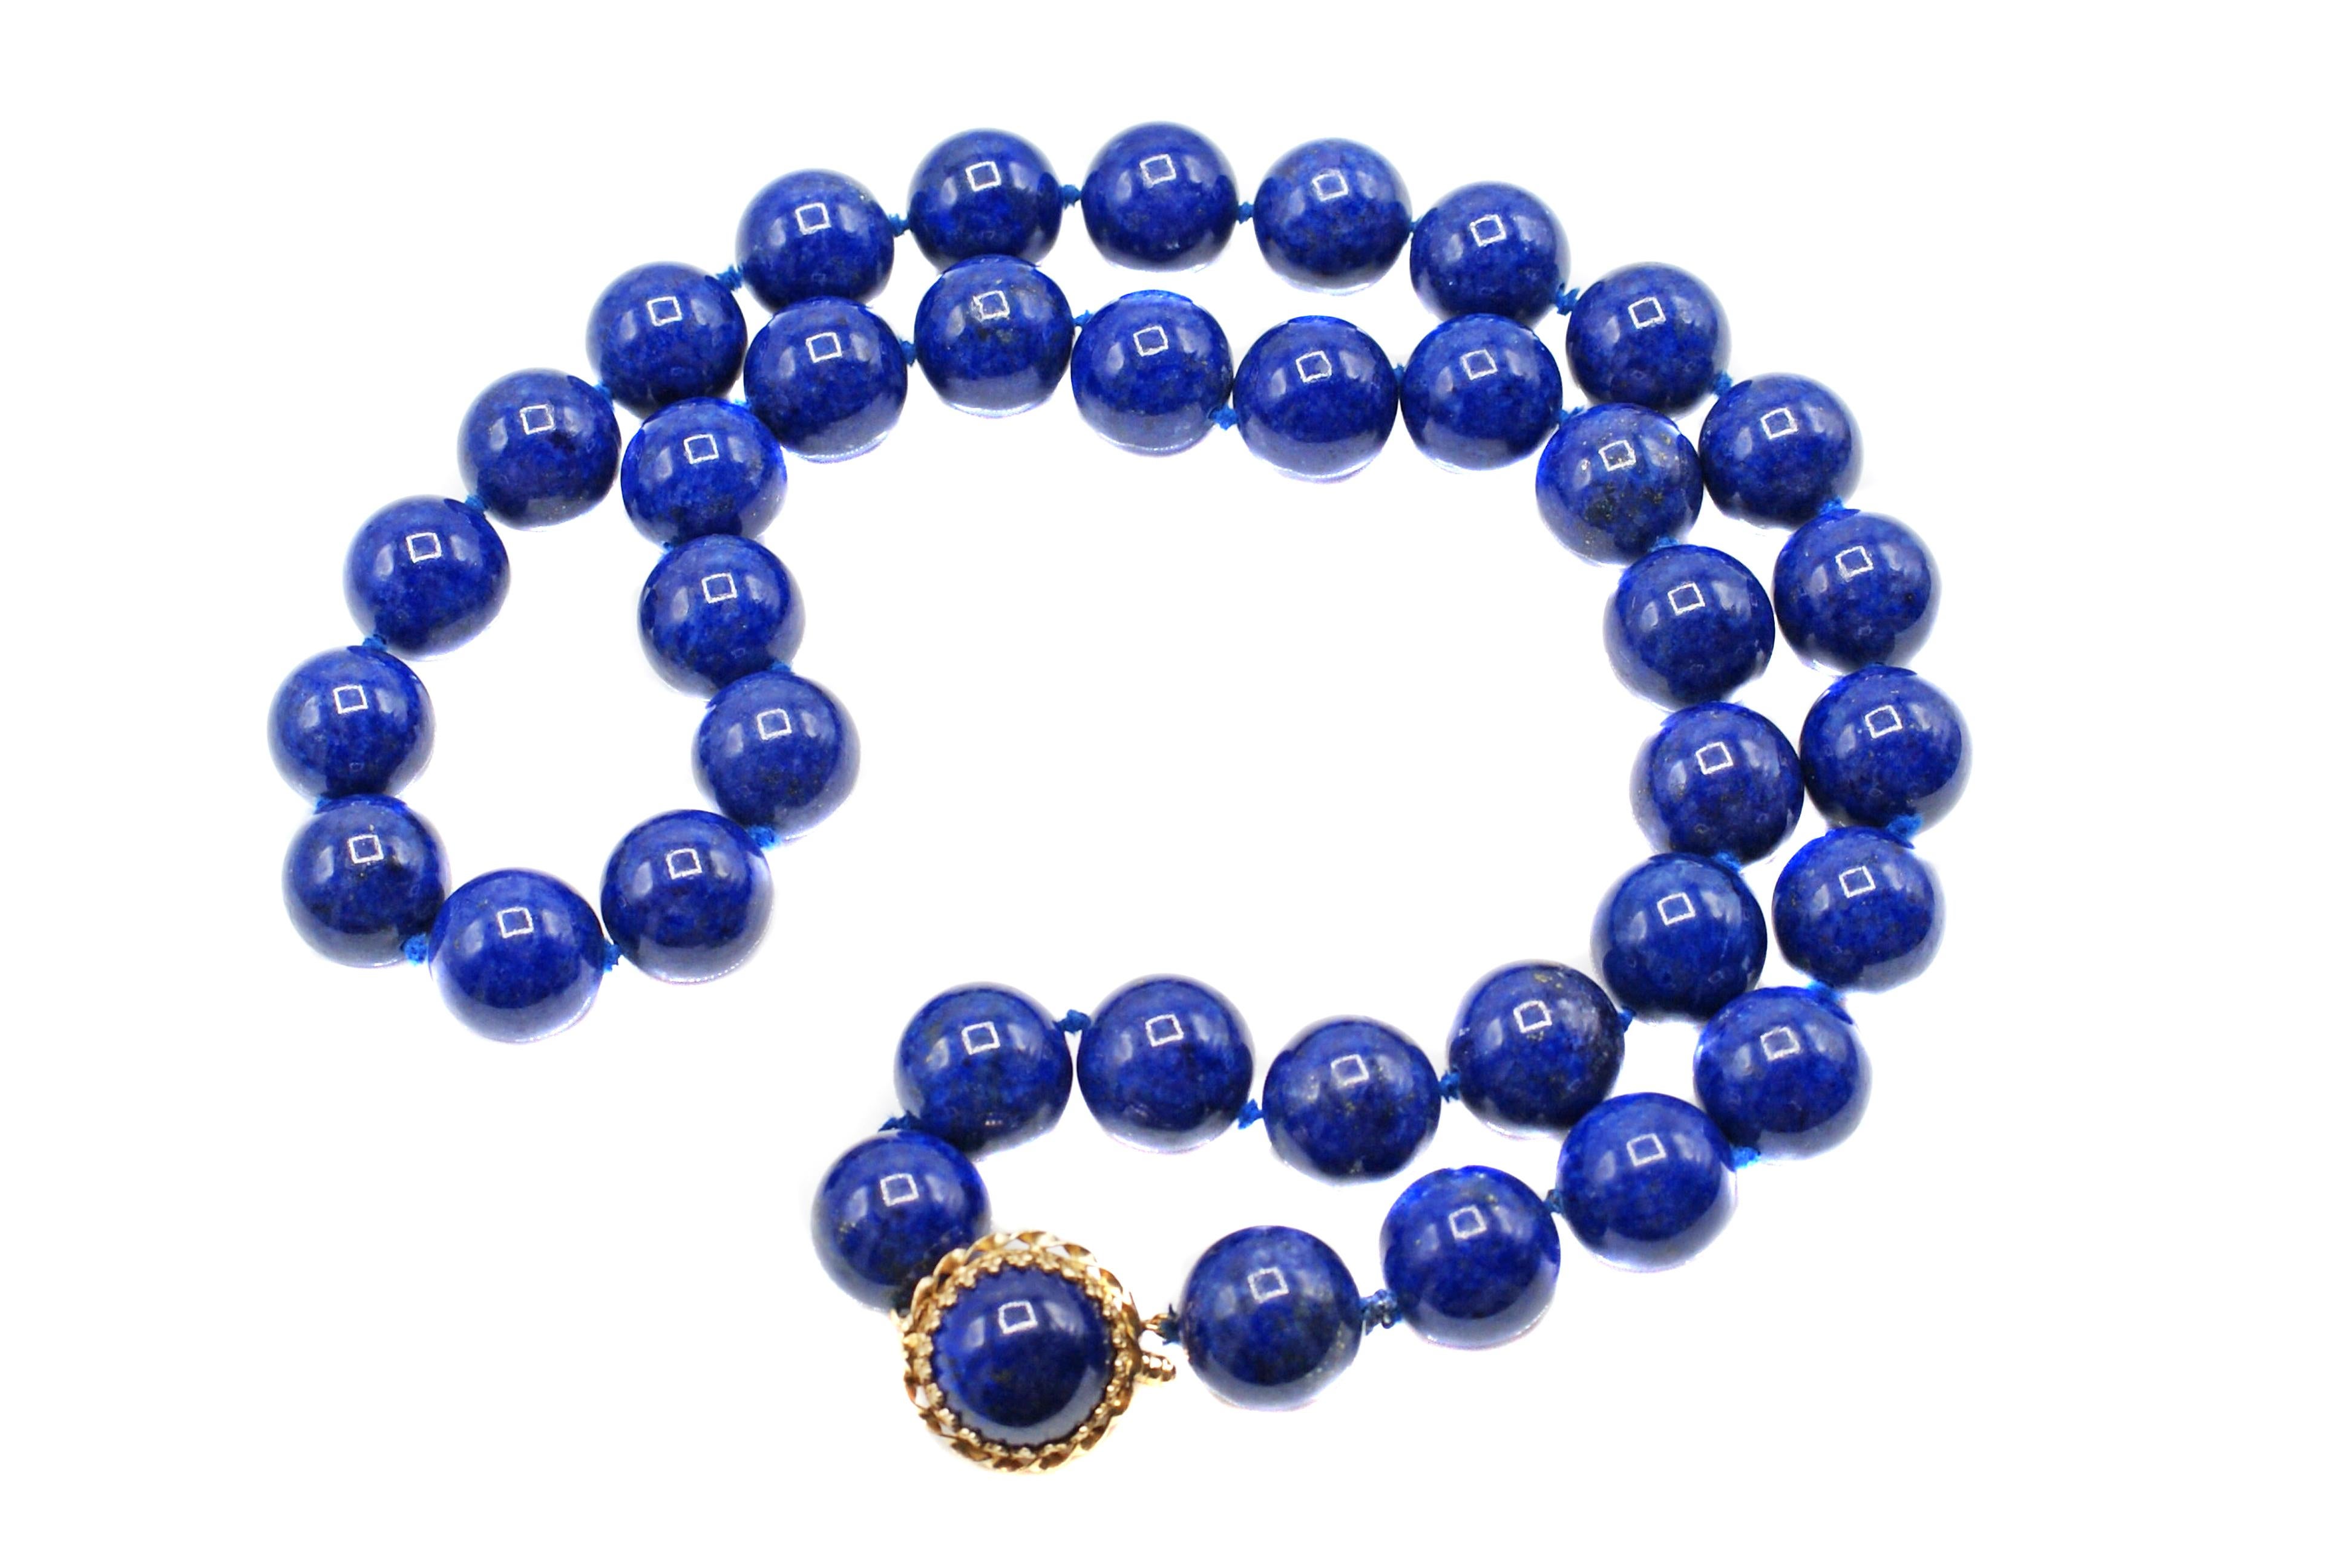 This amazing strand of 38 beads of royal blue natural lapis lazuli is perfectly matched in size and color. The average diameter of the beads measure 15.20 millimeters or 0.60 inches. Each bead has a beautiful uniform blue throughout the entire